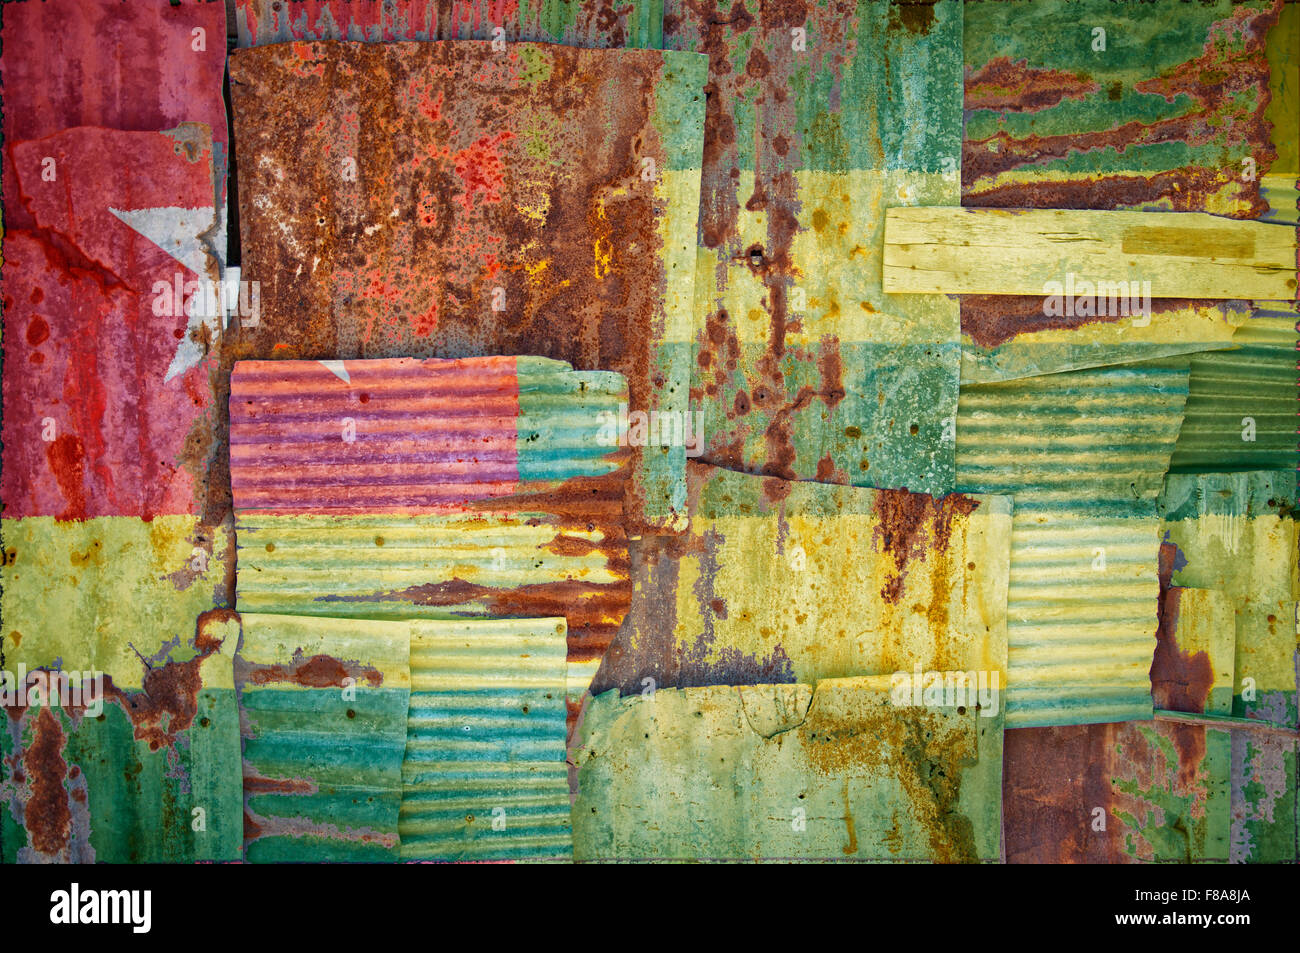 An abstract background image of the flag of Togo painted on to rusty corrugated iron sheets overlapping to form a wall or fence. Stock Photo